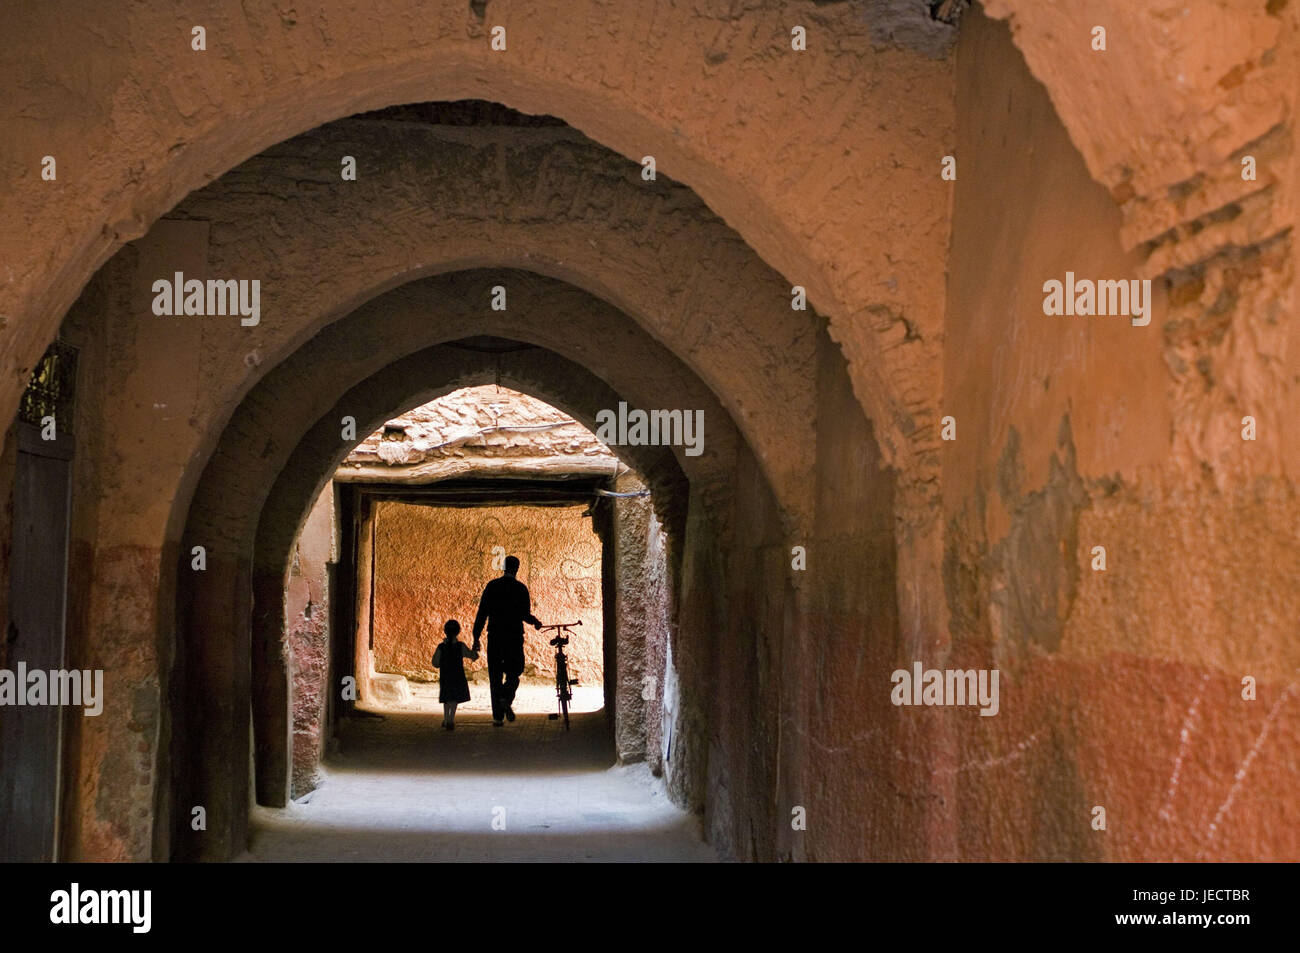 Morocco, Marrakech, Medina, passage, curves, people, silhouette, Africa, North Africa, place of interest, town, part of town, Old Town, architecture, old, historically, walk, person, light, anonymity, unrecognized, whole body, man, father, child, bicycle, push, Stock Photo